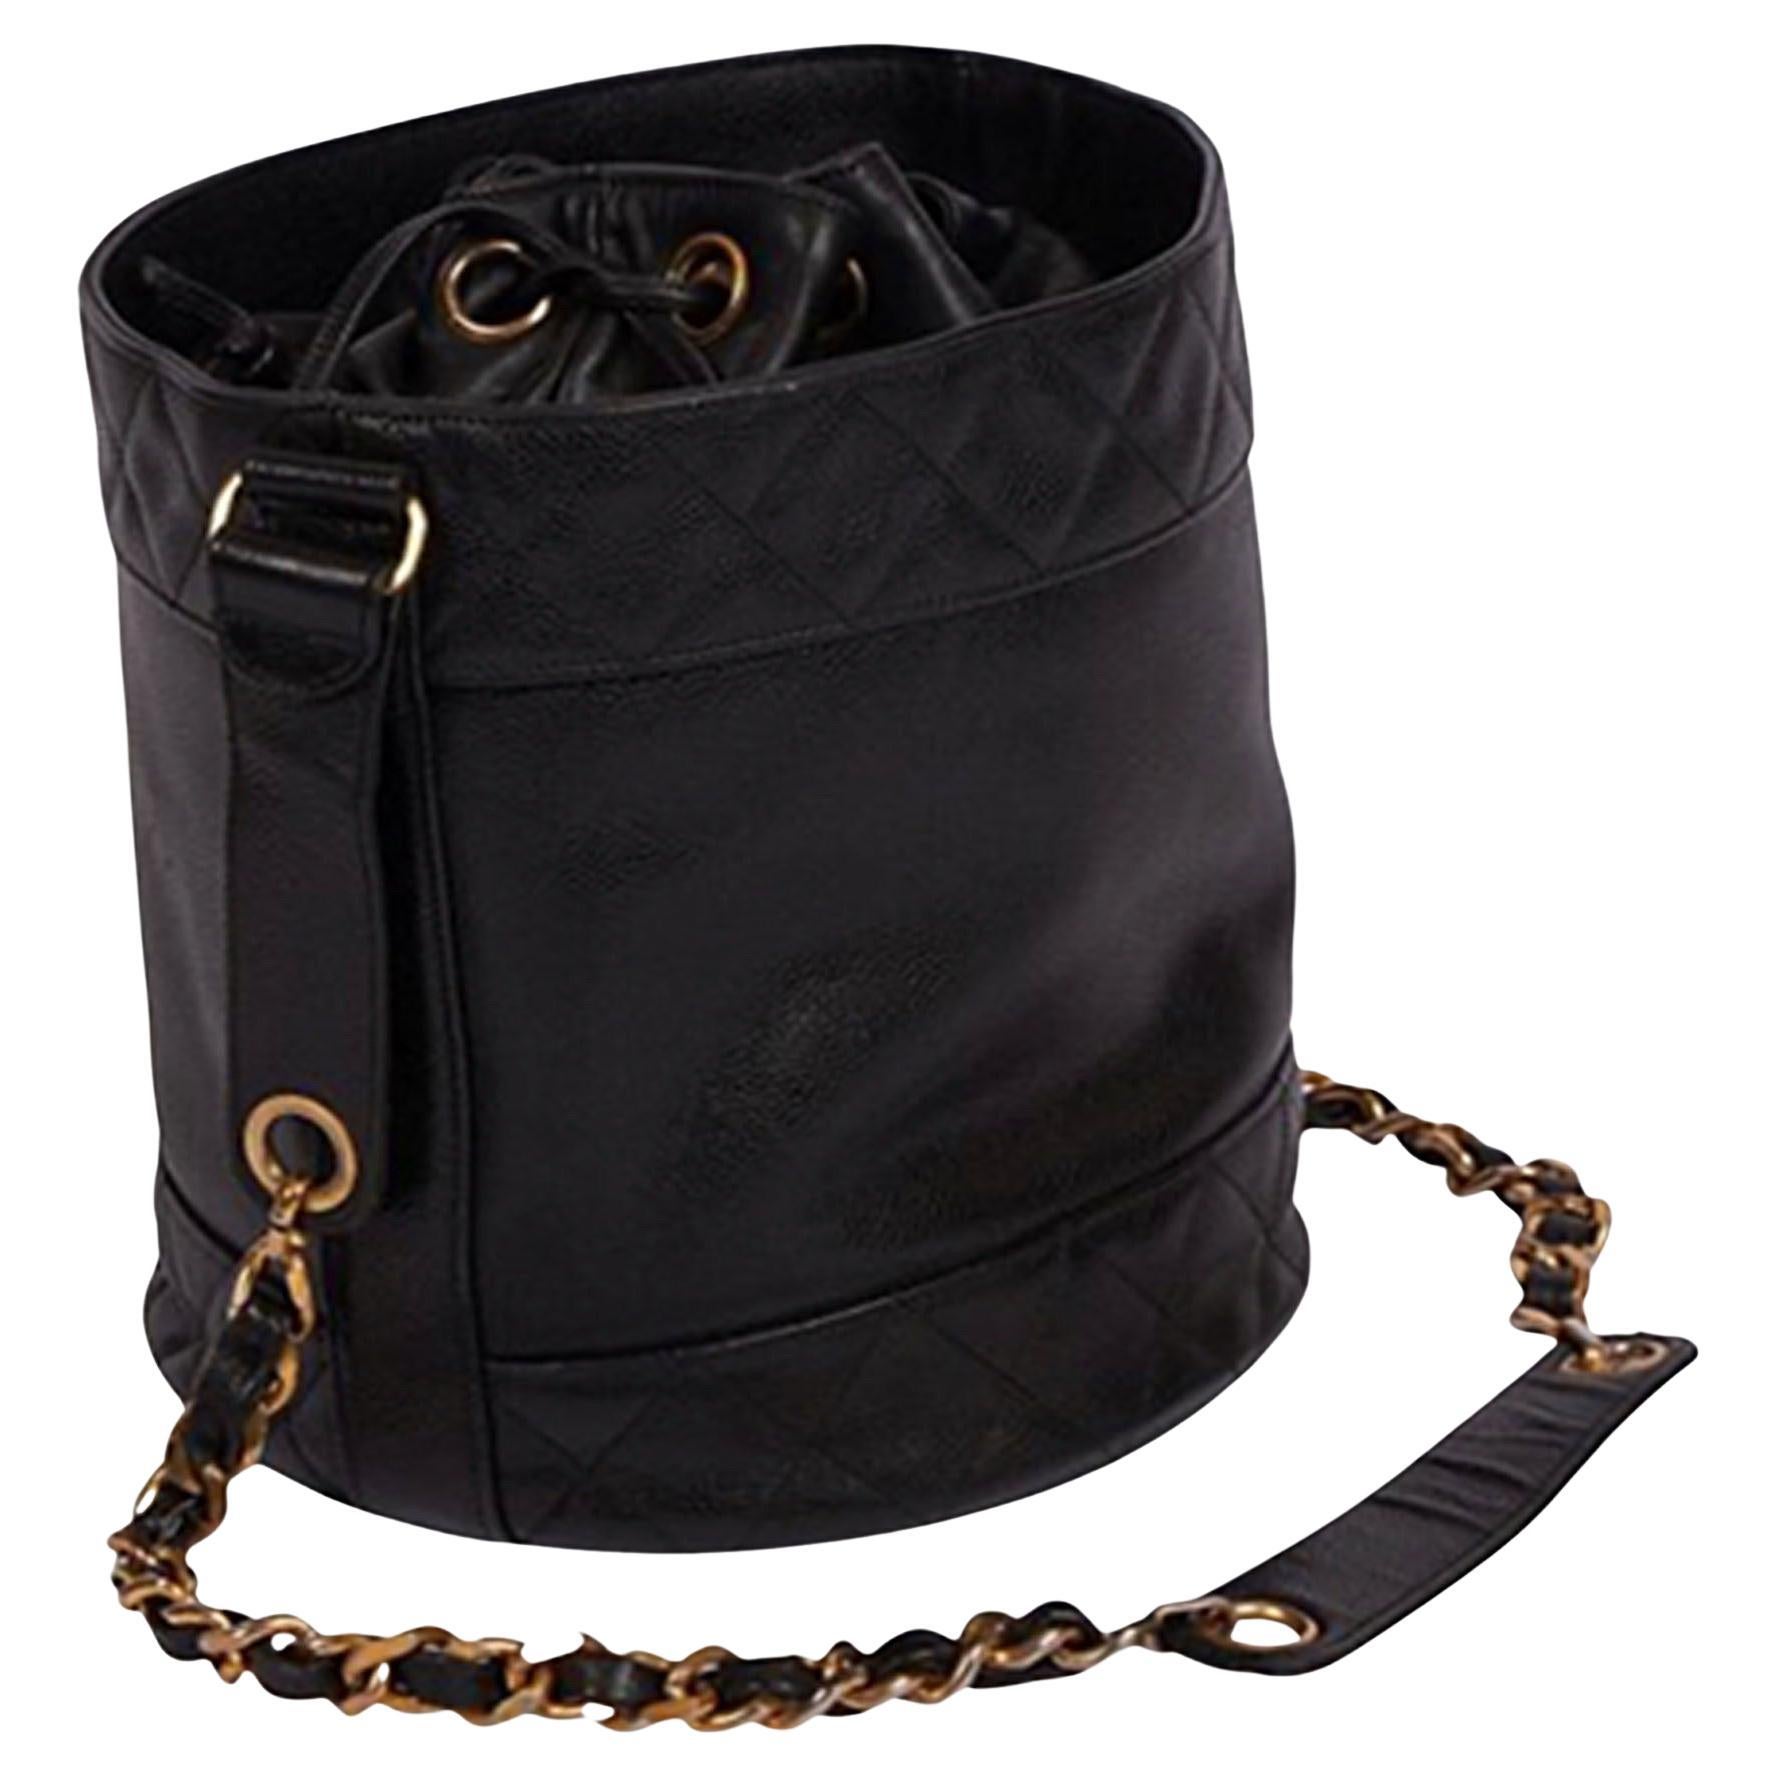 Chanel 90's Black Iconic Bucket Bag For Sale